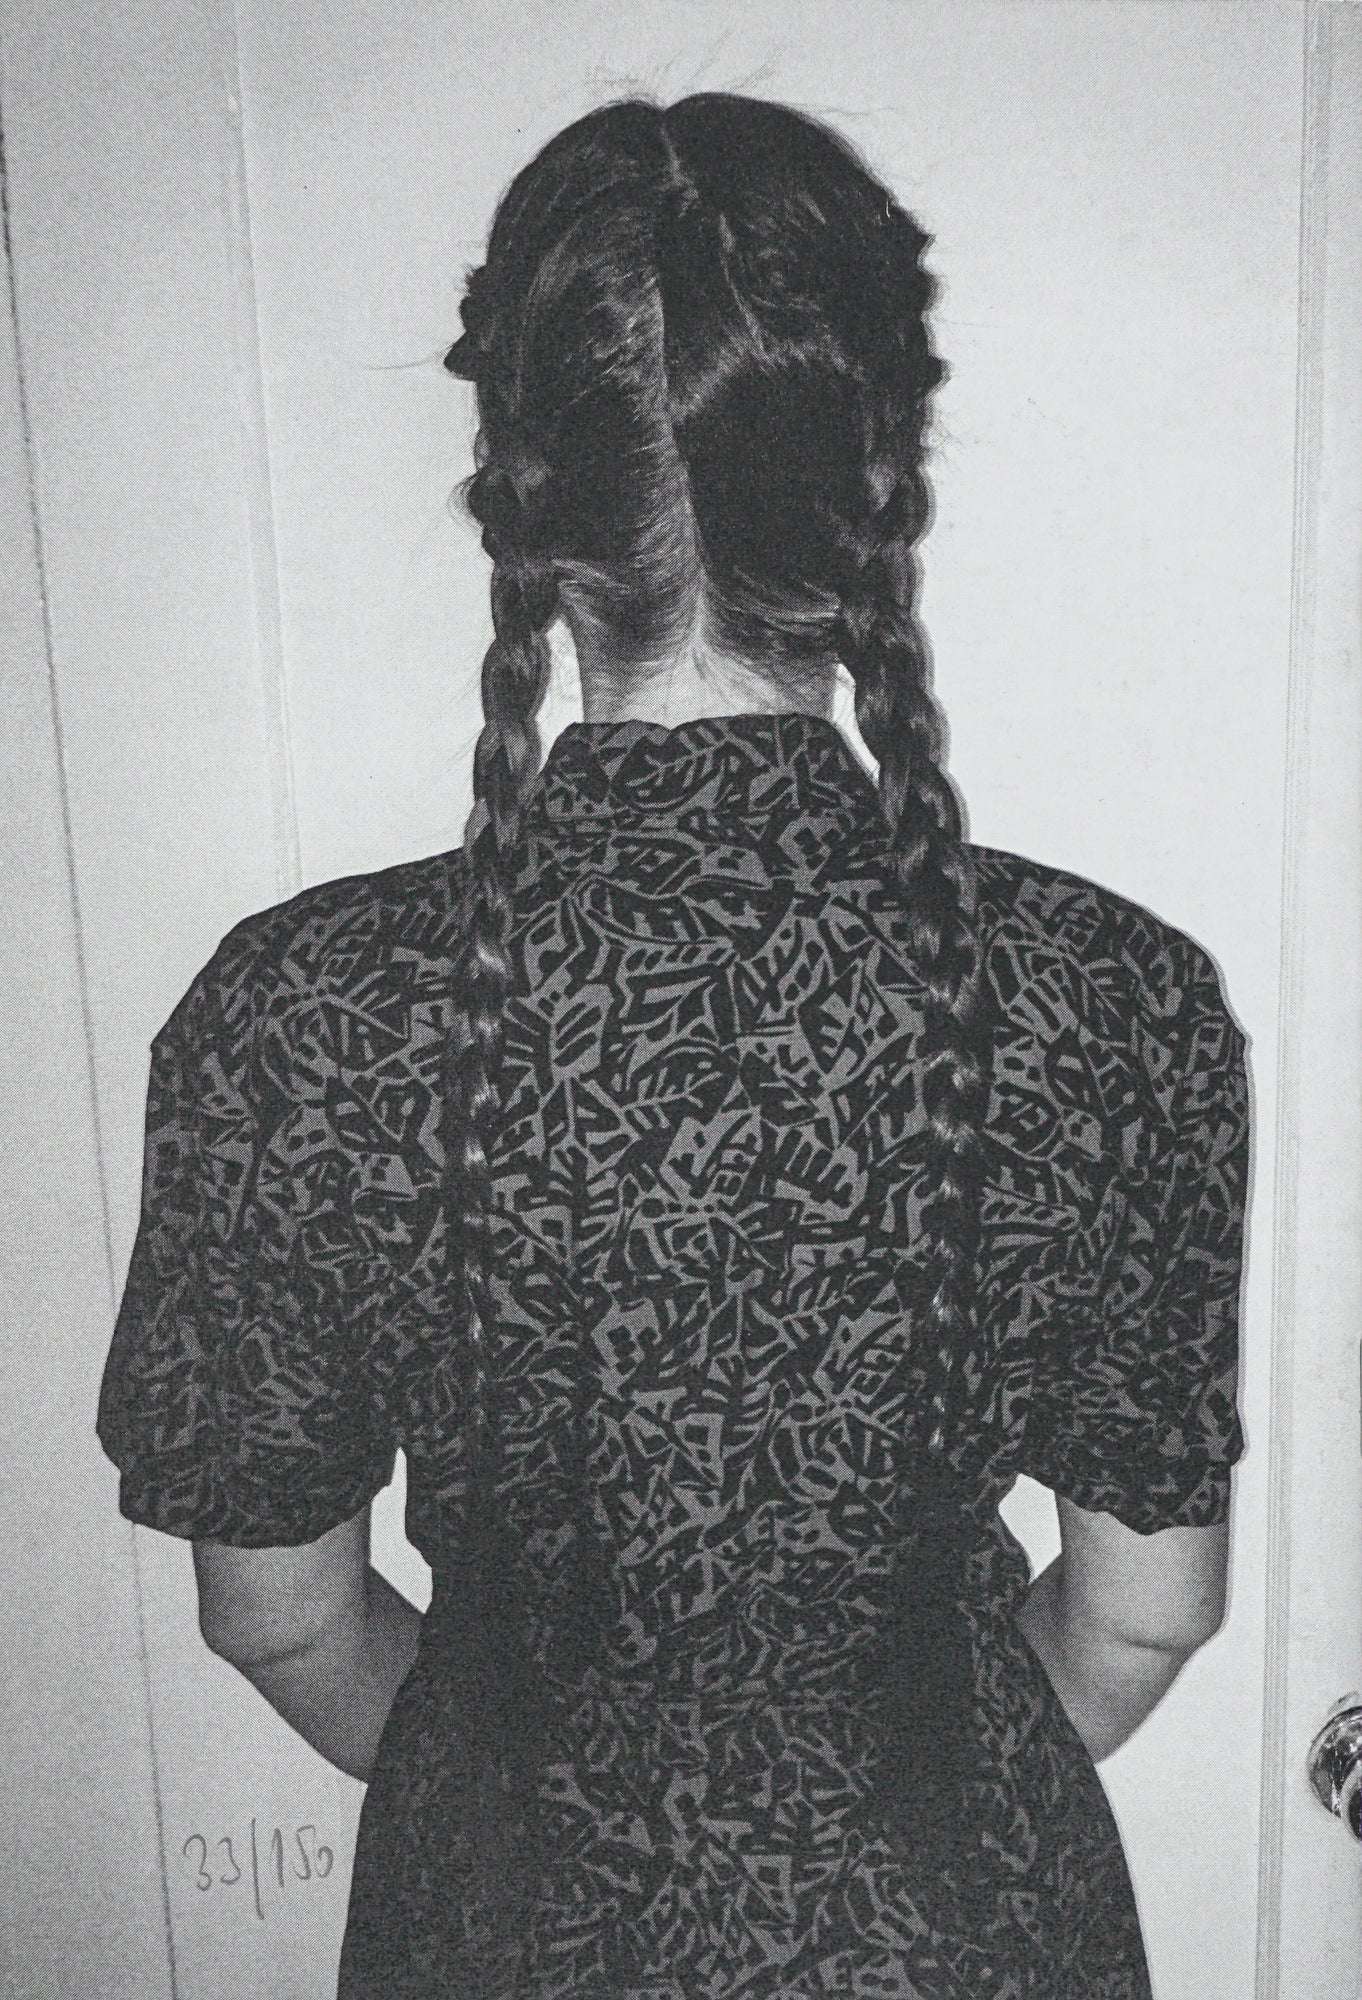 Image, taken from behind, of a person in a dress with two long braids.